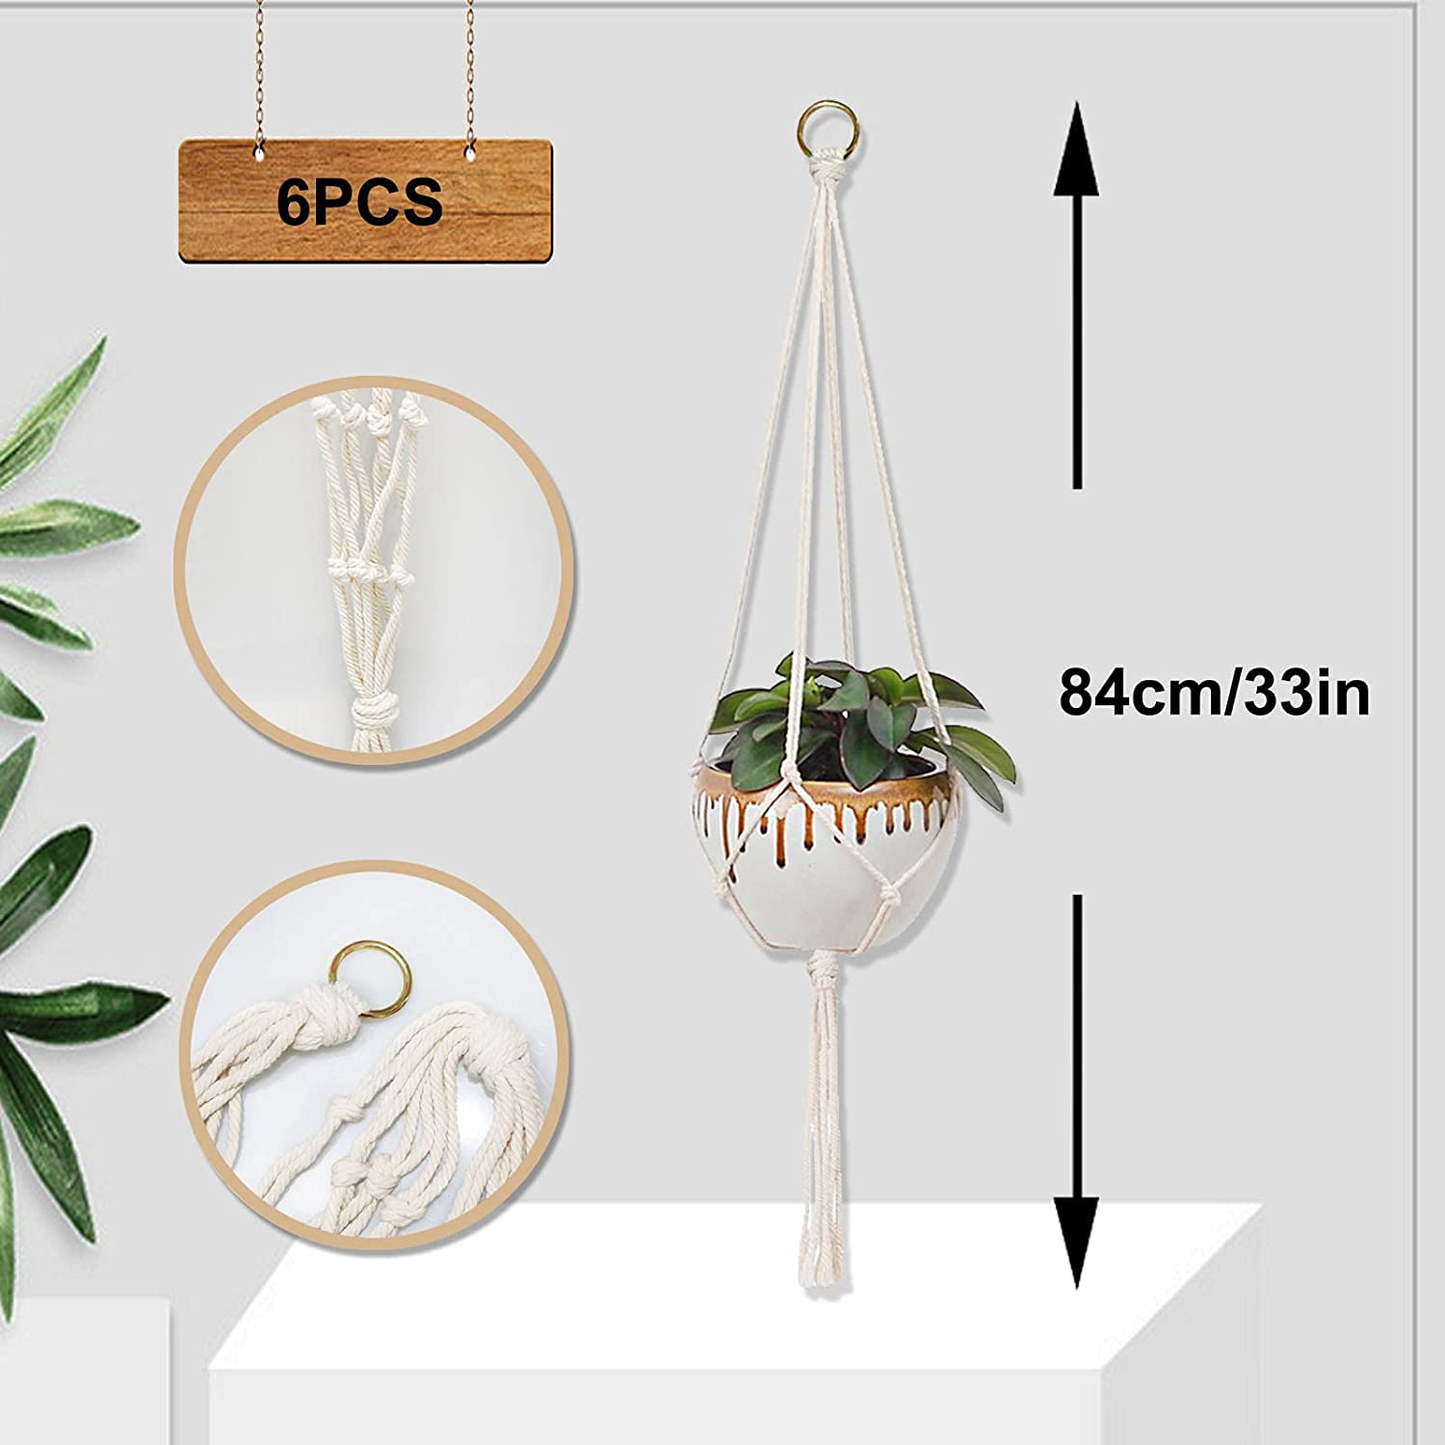 6 Pieces Macrame Plant Hanger Indoor Outdoor Hanging Planter Basket Flower Pot Holder Rope with Durable Metal Ring Joint for Modern Boho Home Decor 29.5 Inch